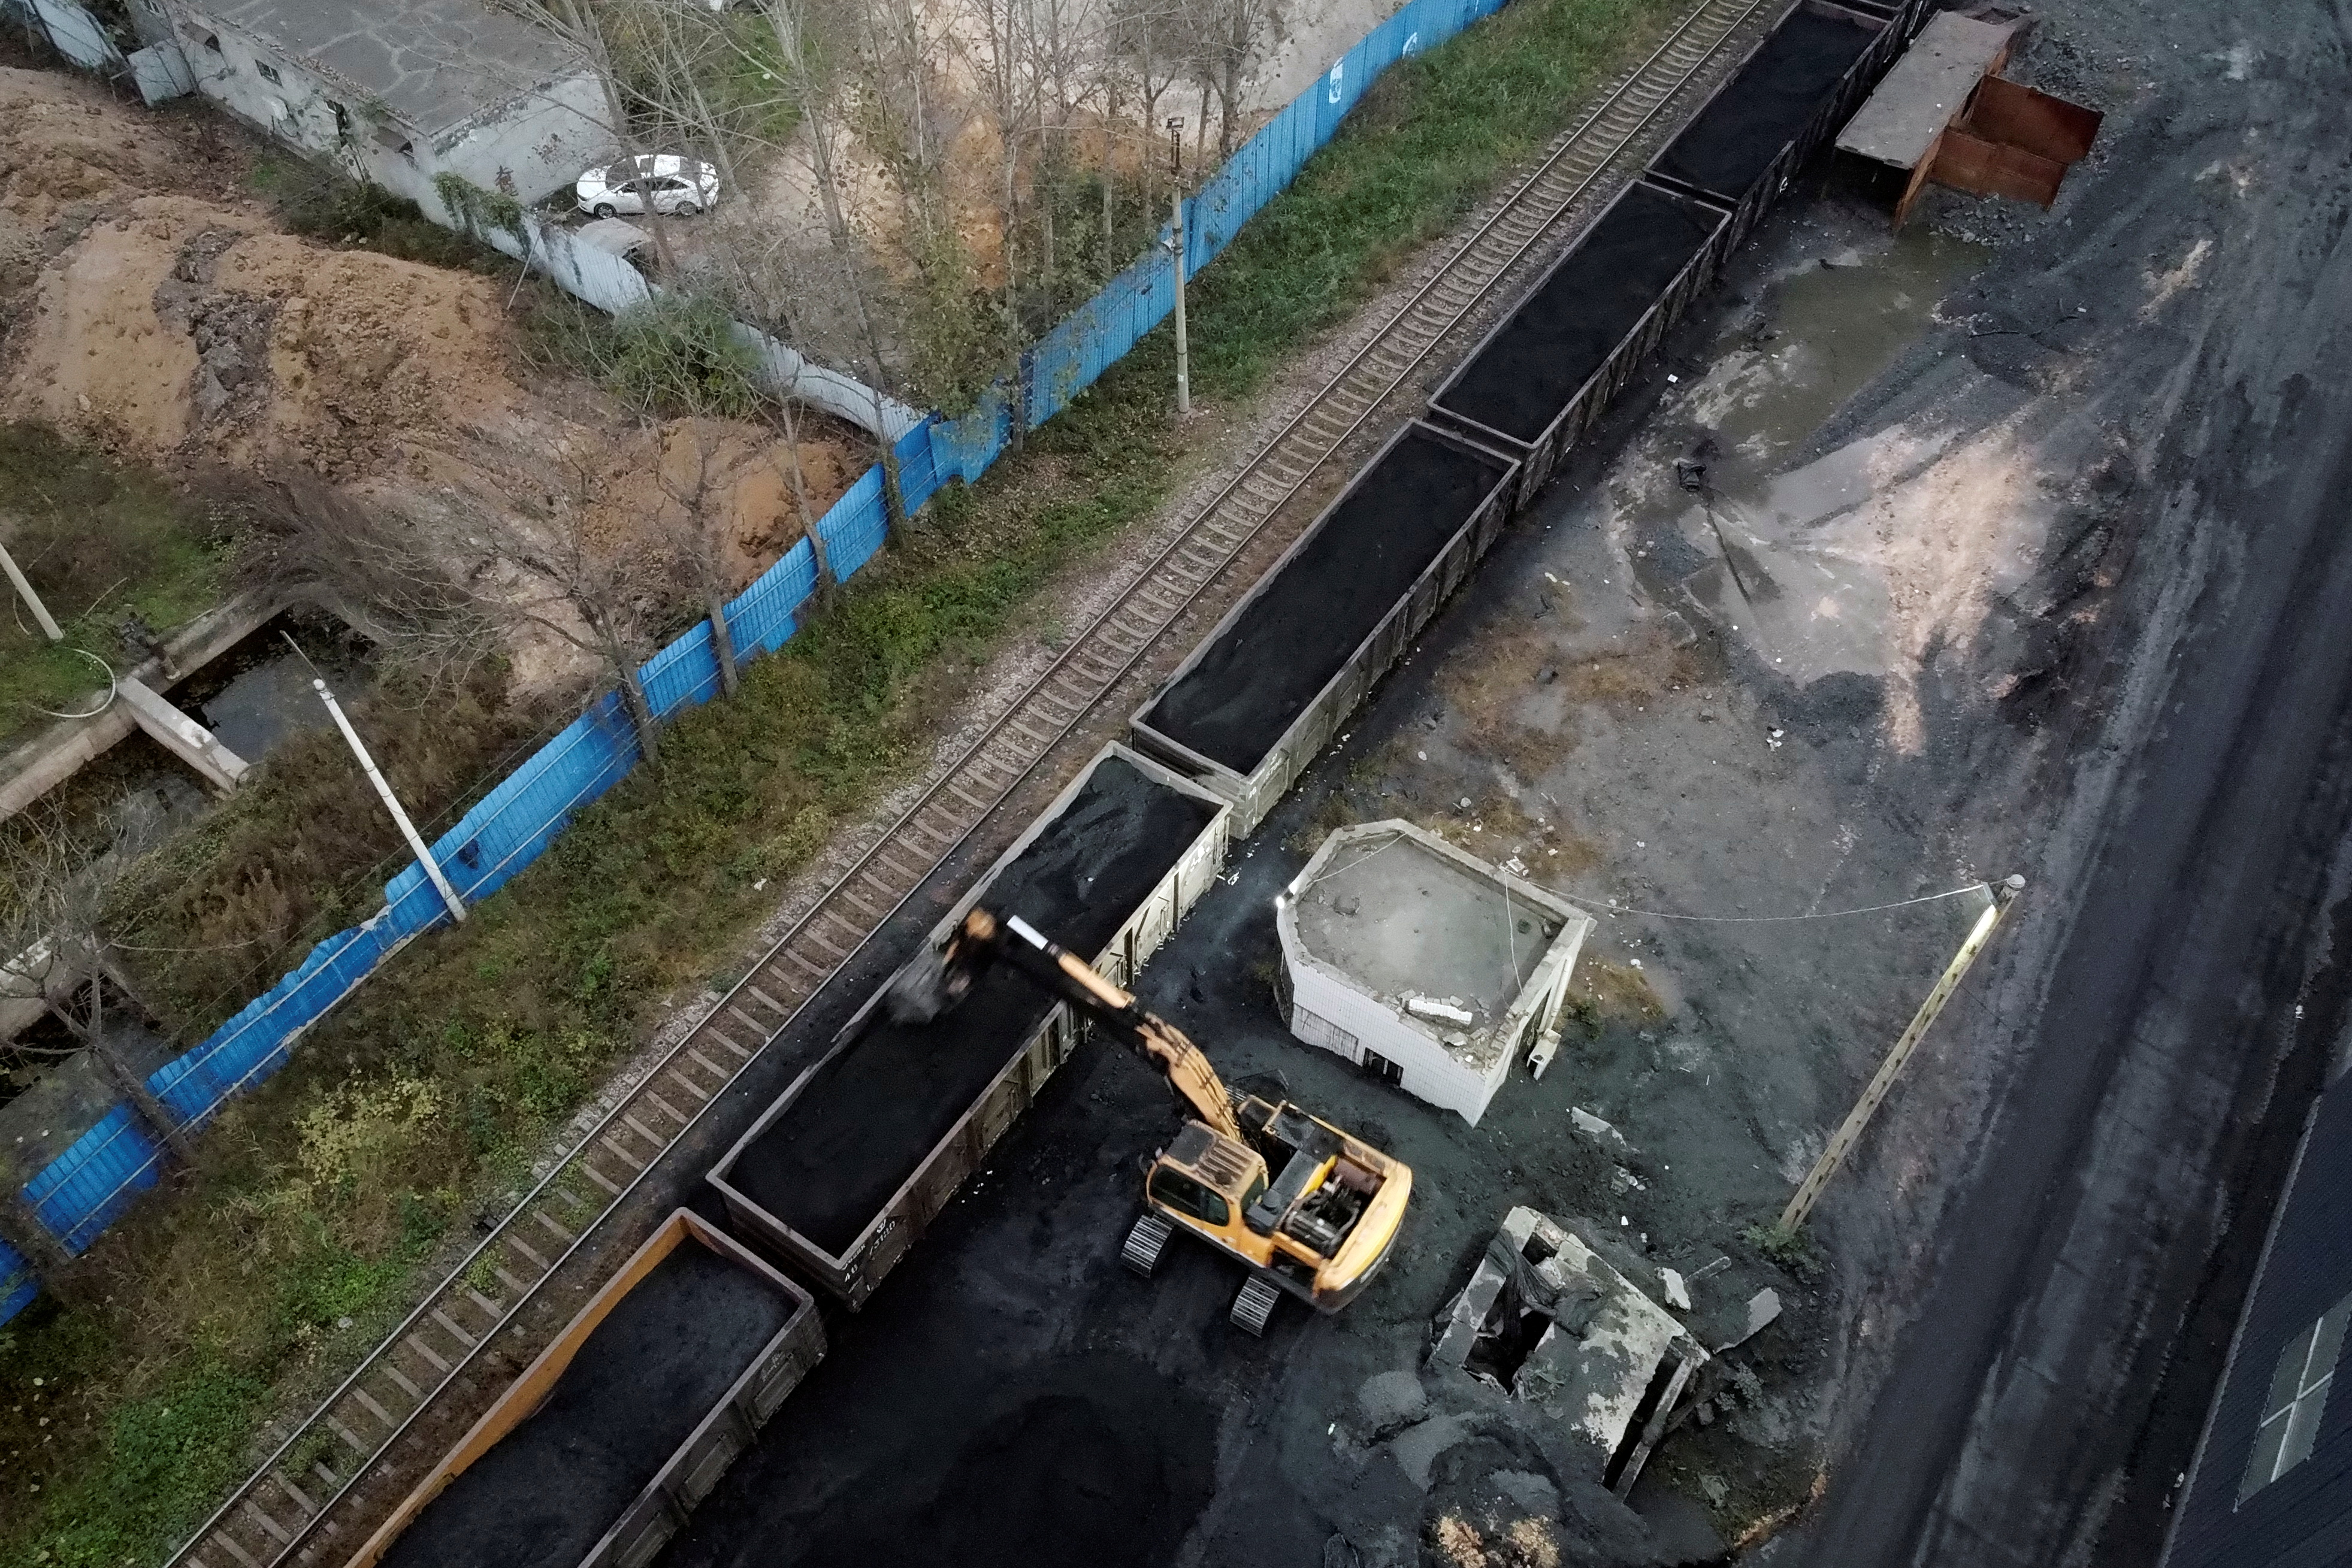 An excavator loads coal onto a train in Pingdingshan, Henan province